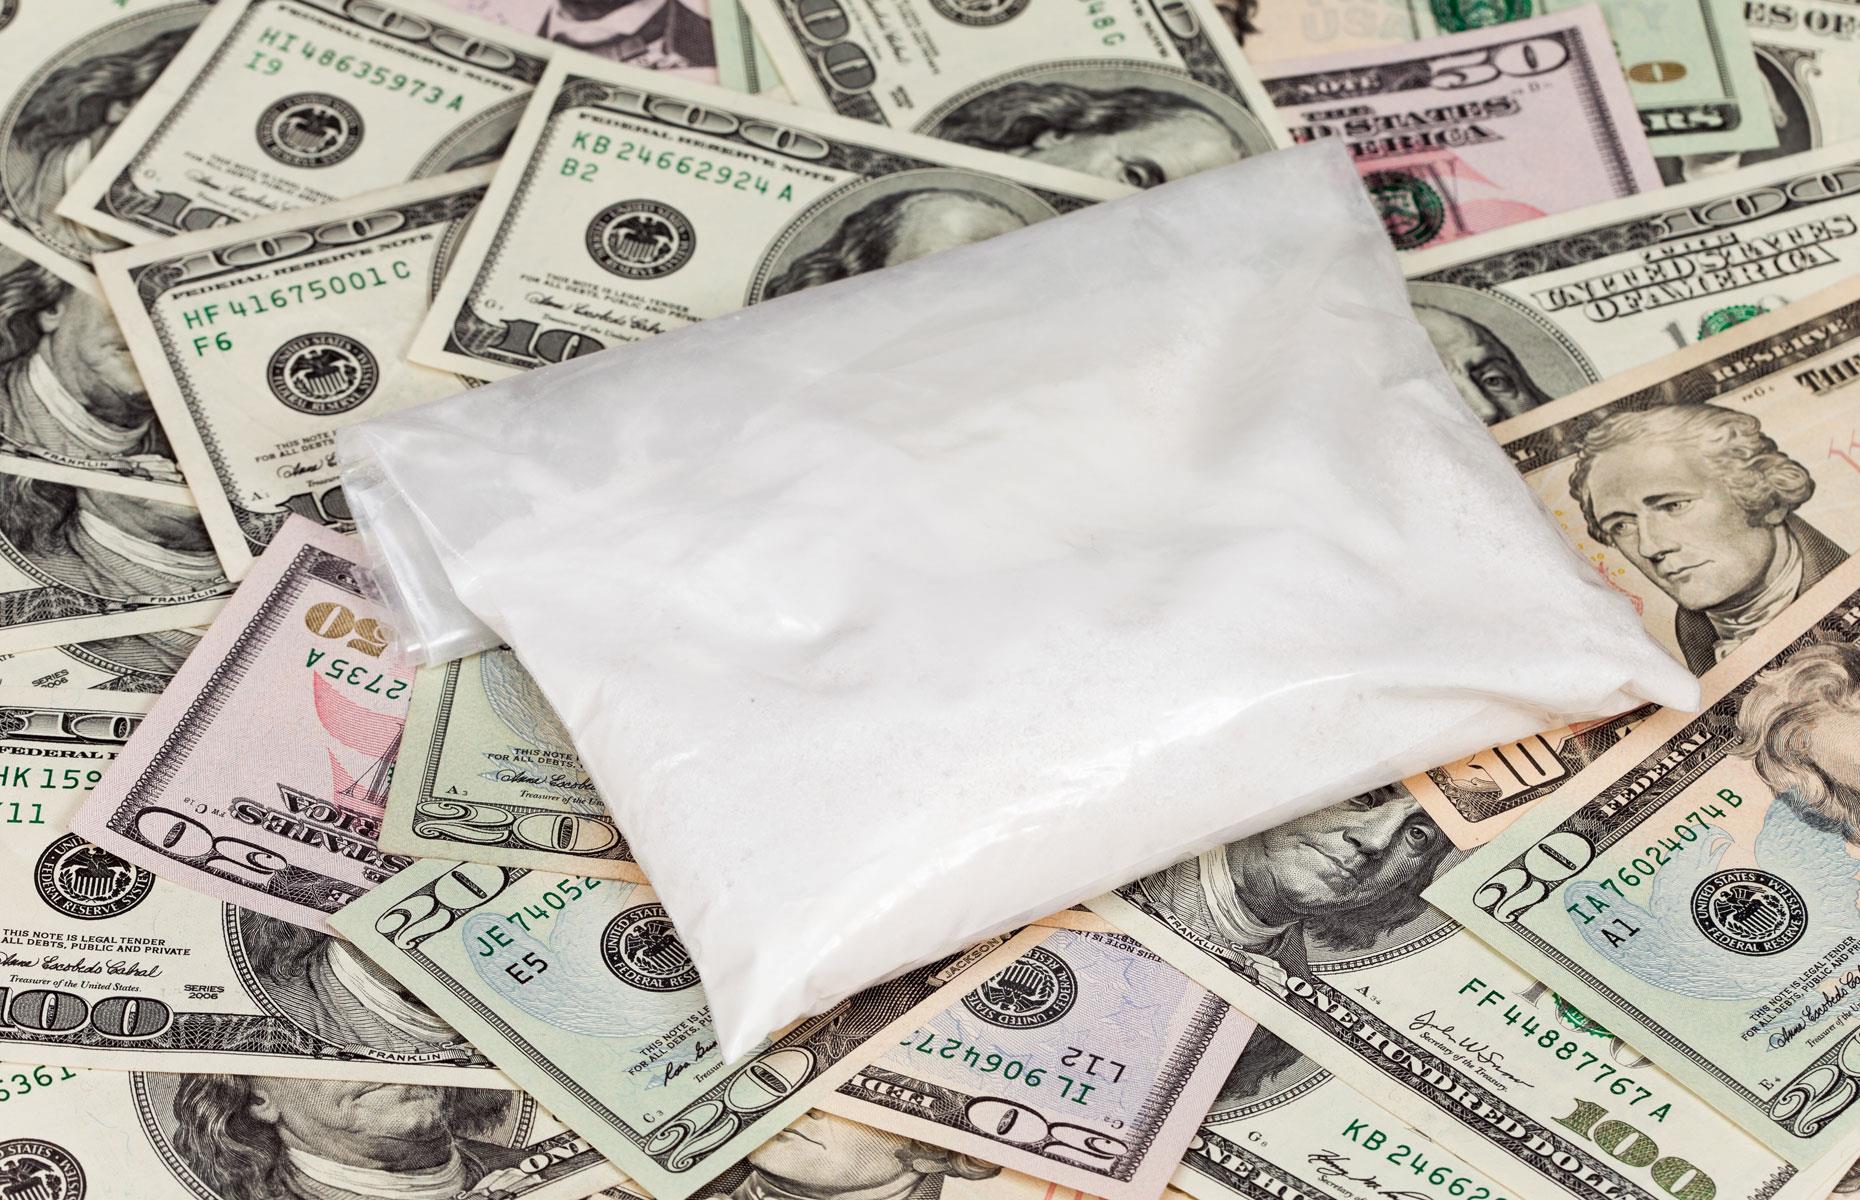 As many as 70% of banknotes could be tainted with heroin